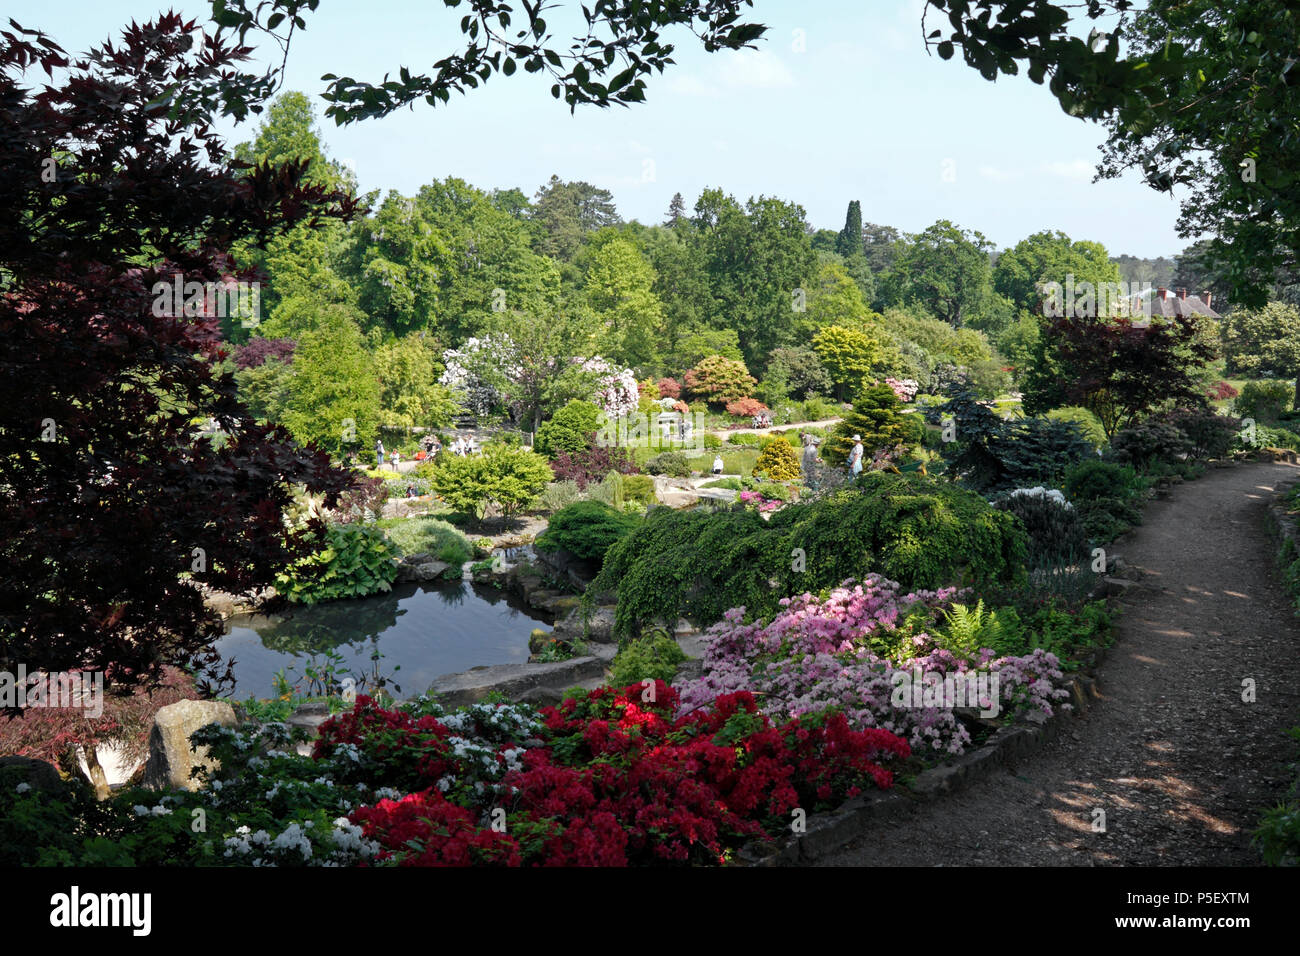 RHS WISLEY FROM THE ROCK GARDEN. EARLY SUMMER. Stock Photo